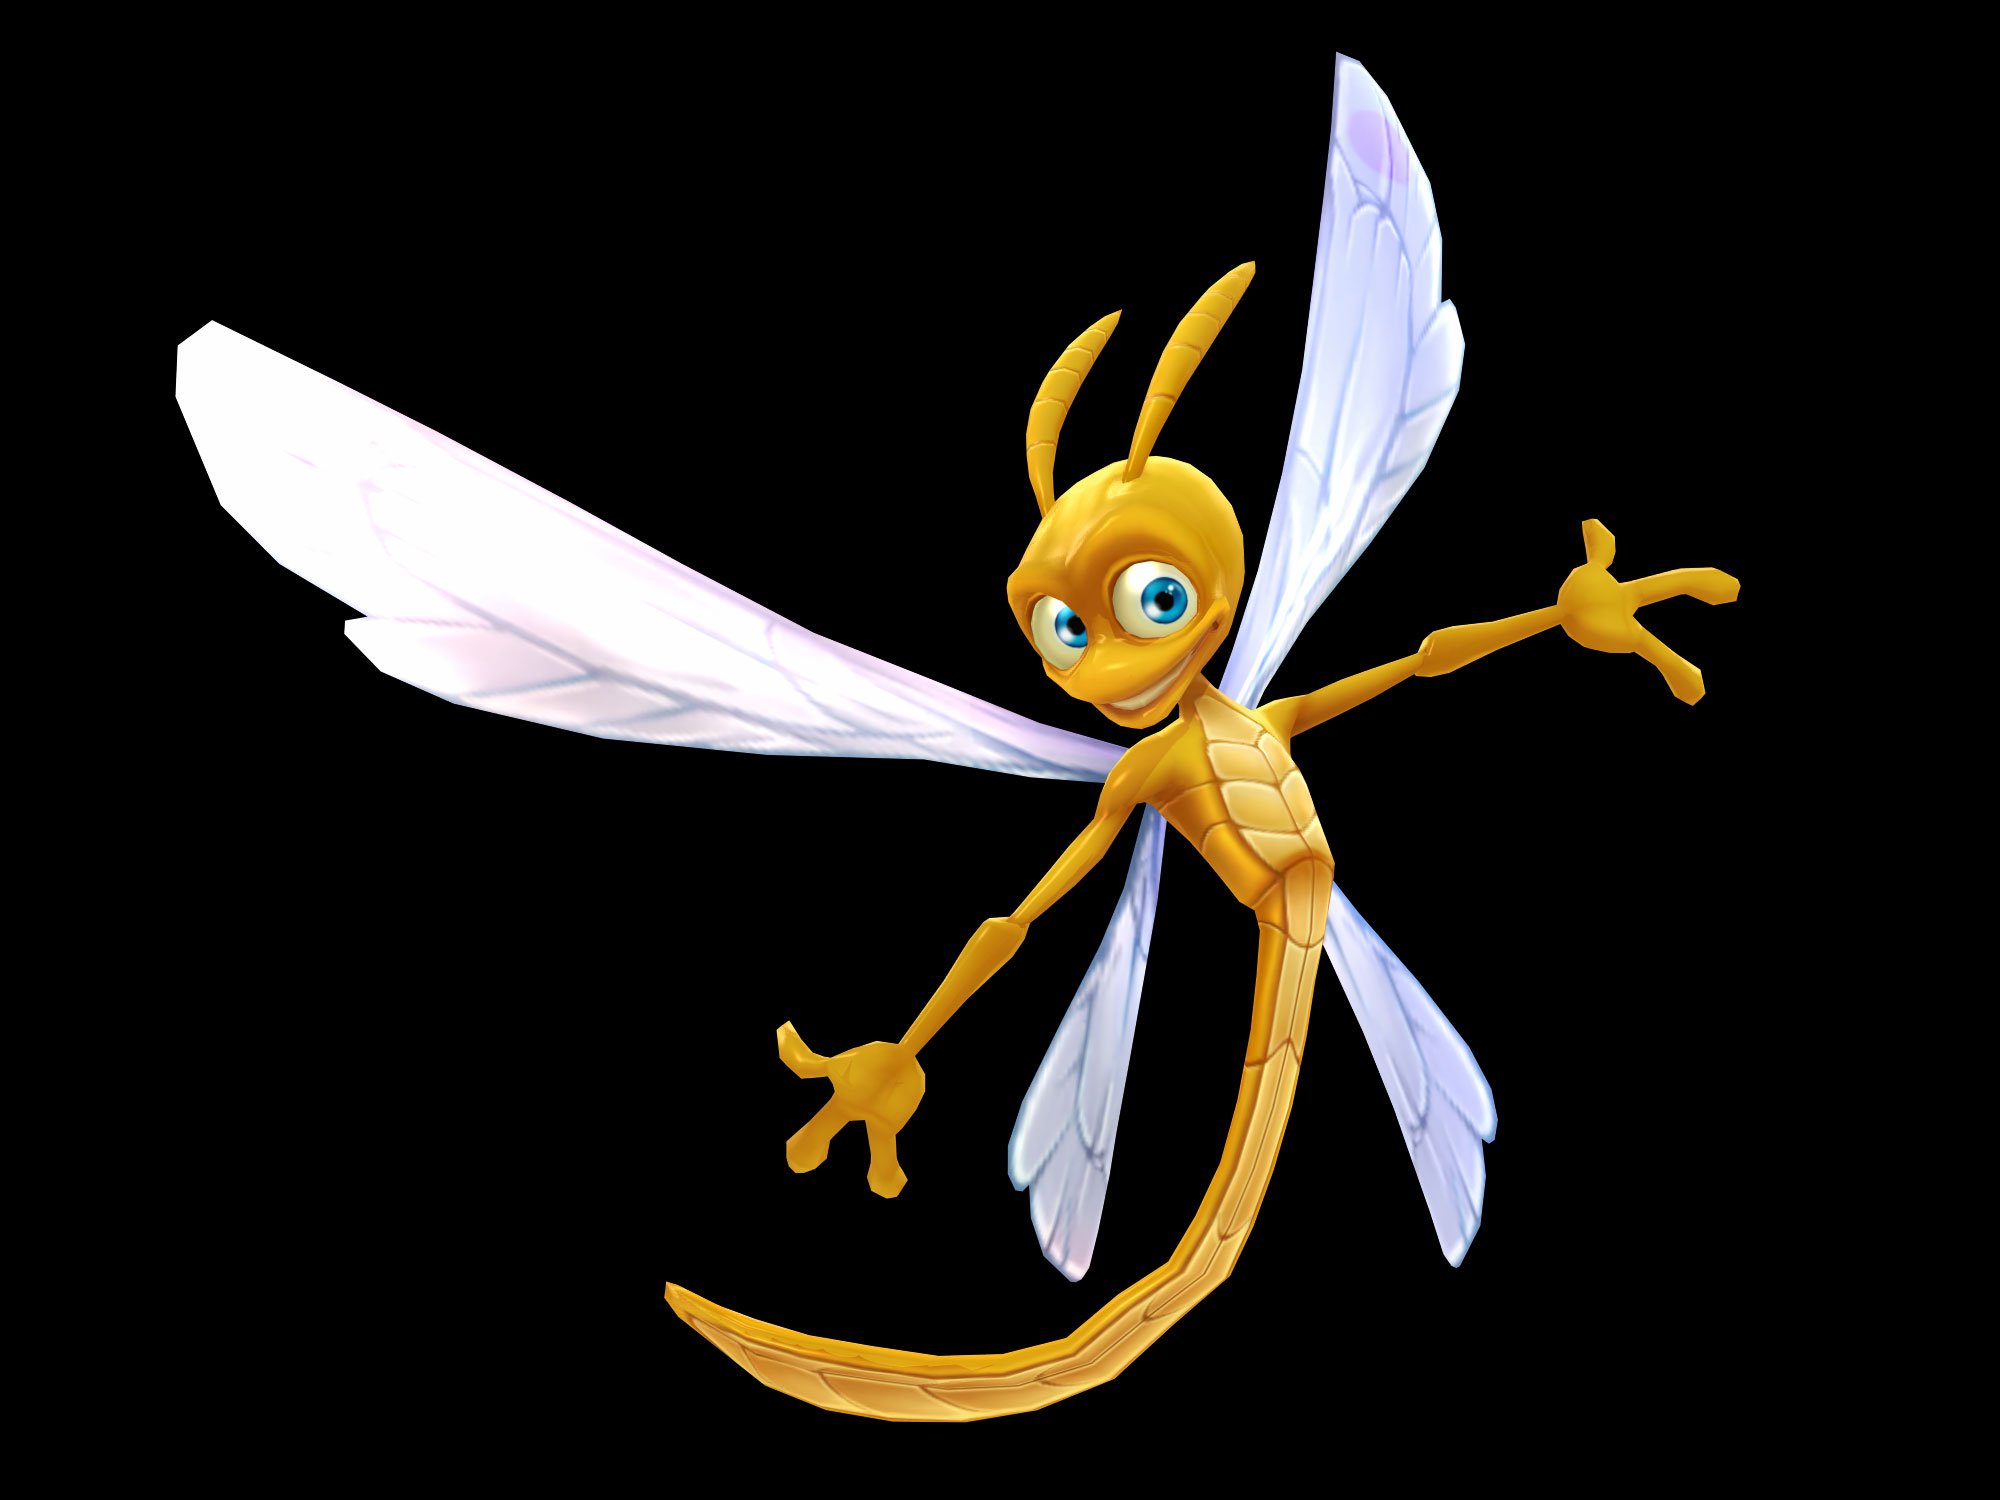 Sparx The Dragonfly 2000x1500